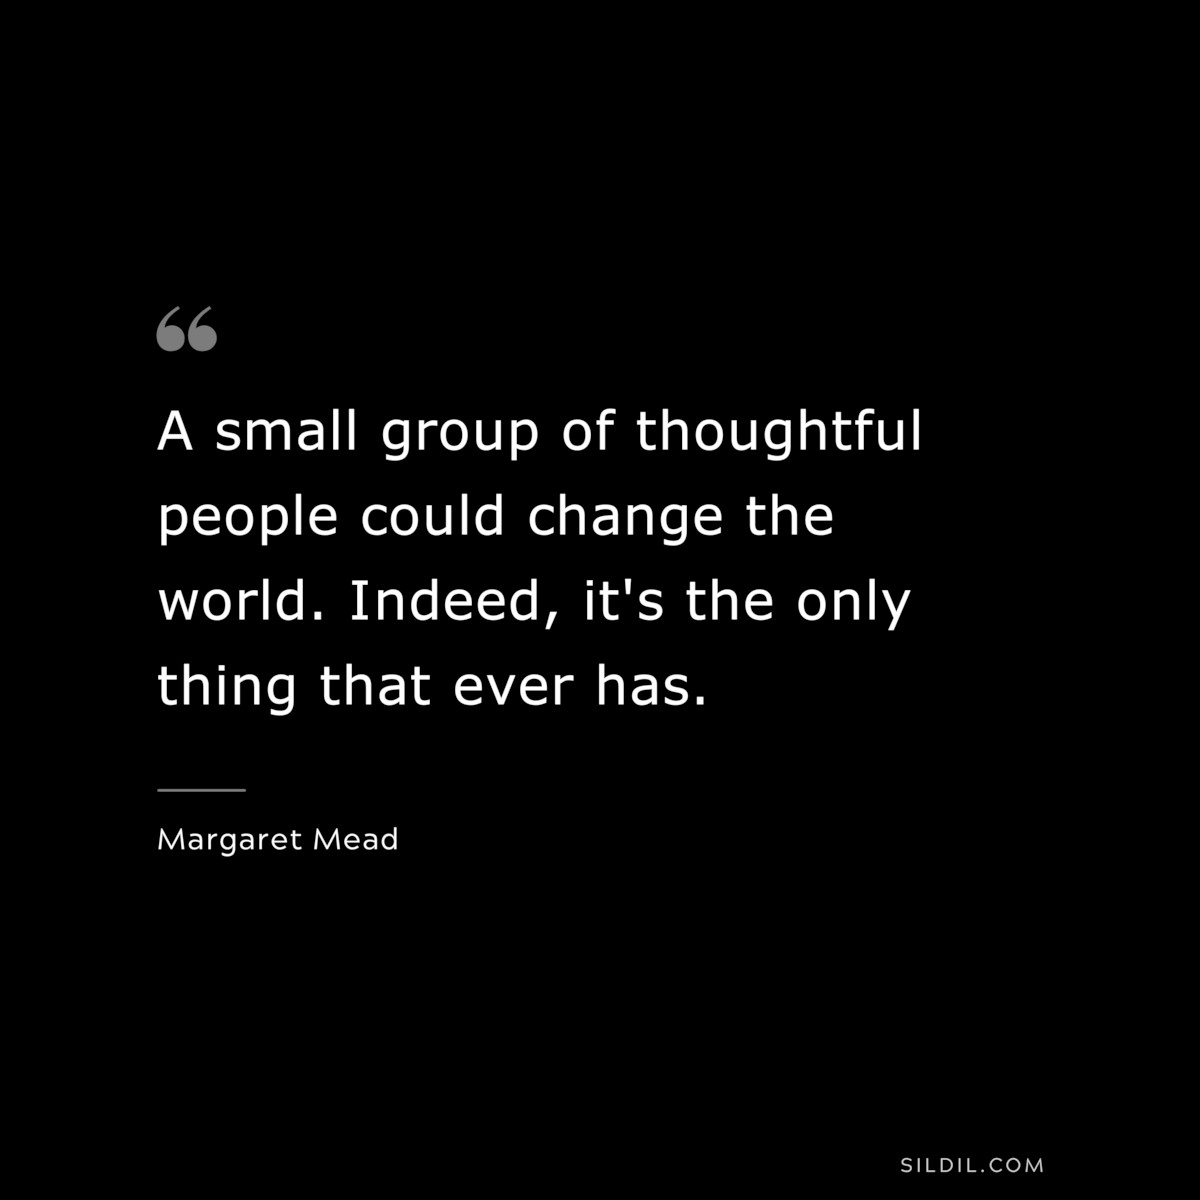 A small group of thoughtful people could change the world. Indeed, it's the only thing that ever has. ― Margaret Mead